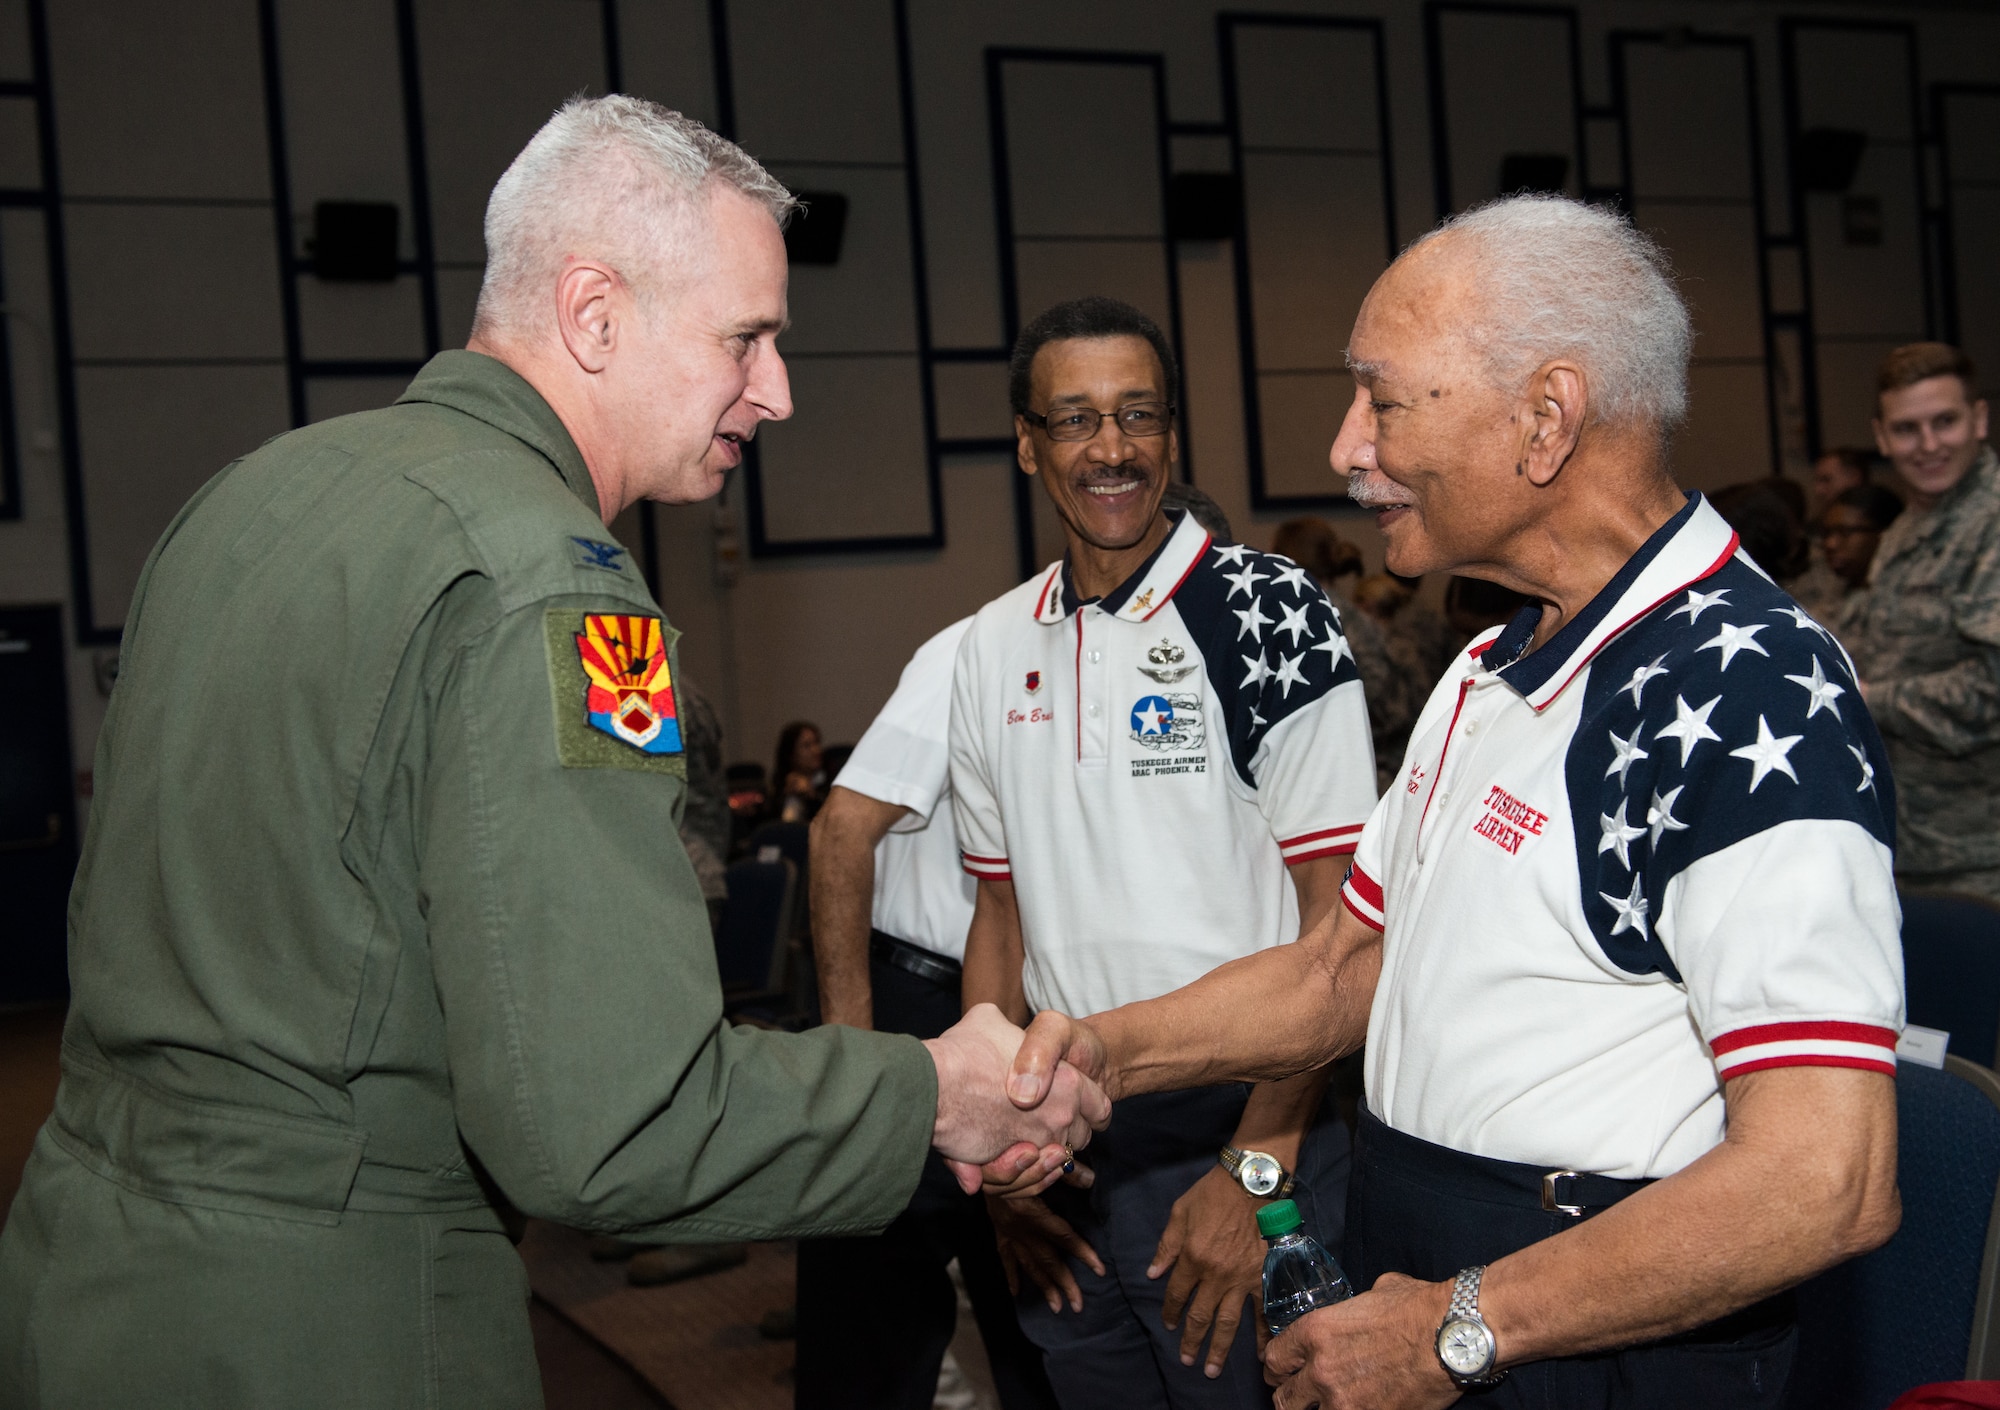 Col. Michael Richardson, 56th Fighter Wing vice commander, shakes hands with retired Lt. Col. Robert Ashby, Tuskegee Airman, during the 2018 Tuskegee Airmen Honor Event at Luke Air Force Base, Ariz., Feb. 15, 2018. Following the event, Airmen participated in a meet-and-greet with Ashby to thank him for the contributions made to the Air Force throughout his career. (U.S. Air Force photo/ Airman 1st Class Alexander Cook)